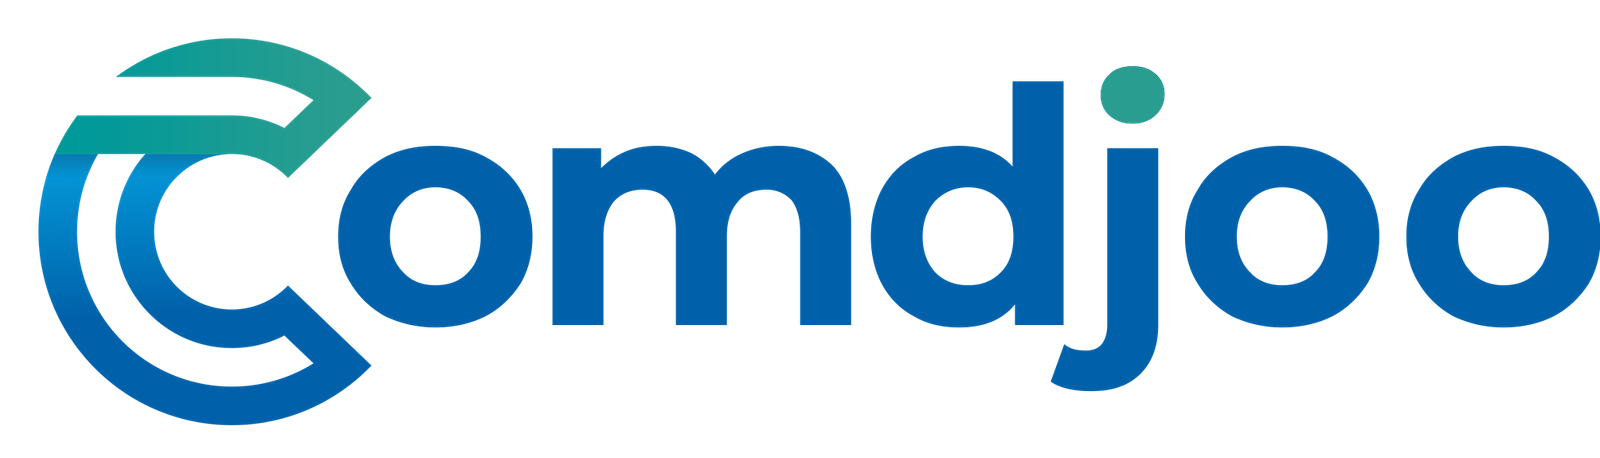 cropped cropped color logo.png